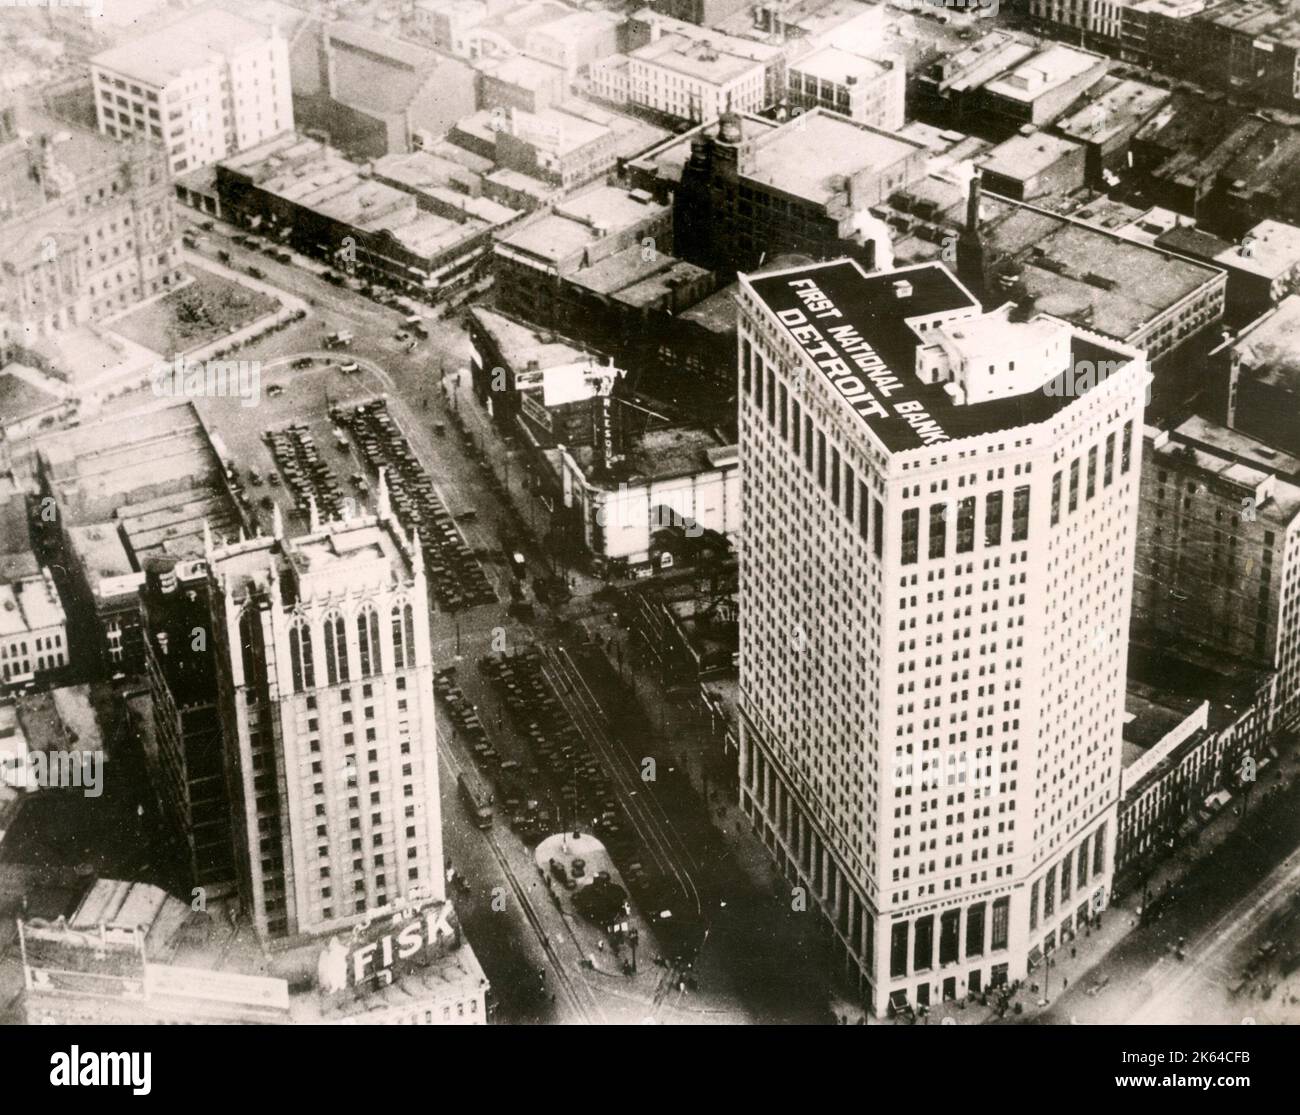 Early 20th century vintage press photograph - First National Bank and aerial view of Detroit Stock Photo